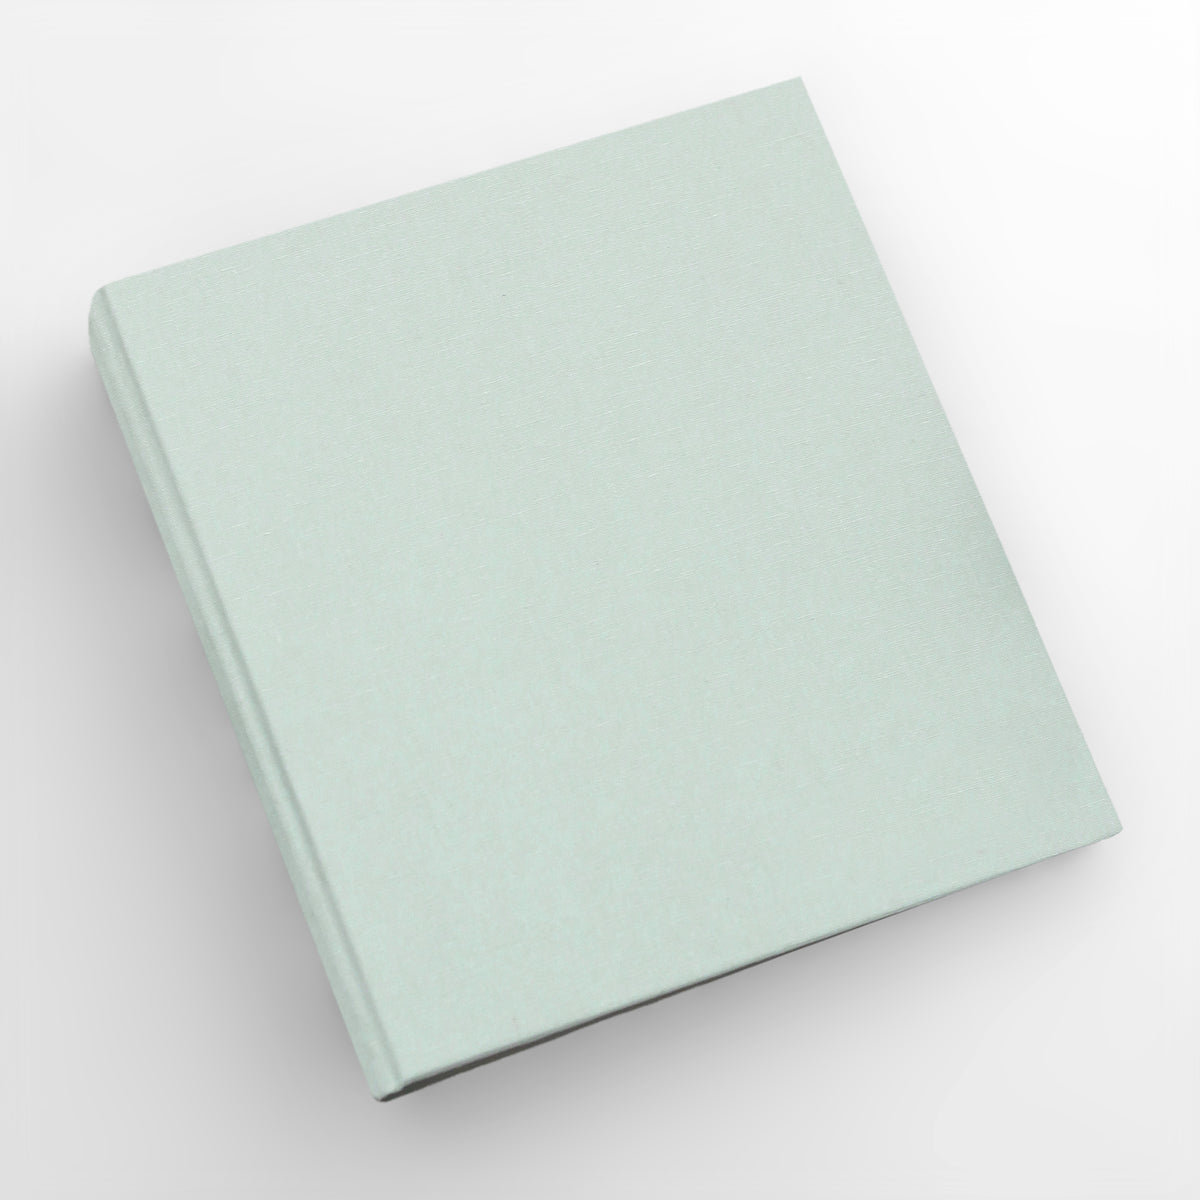 Large Photo Binder | for 8x10 Photos | with Pastel Blue Cotton Cover